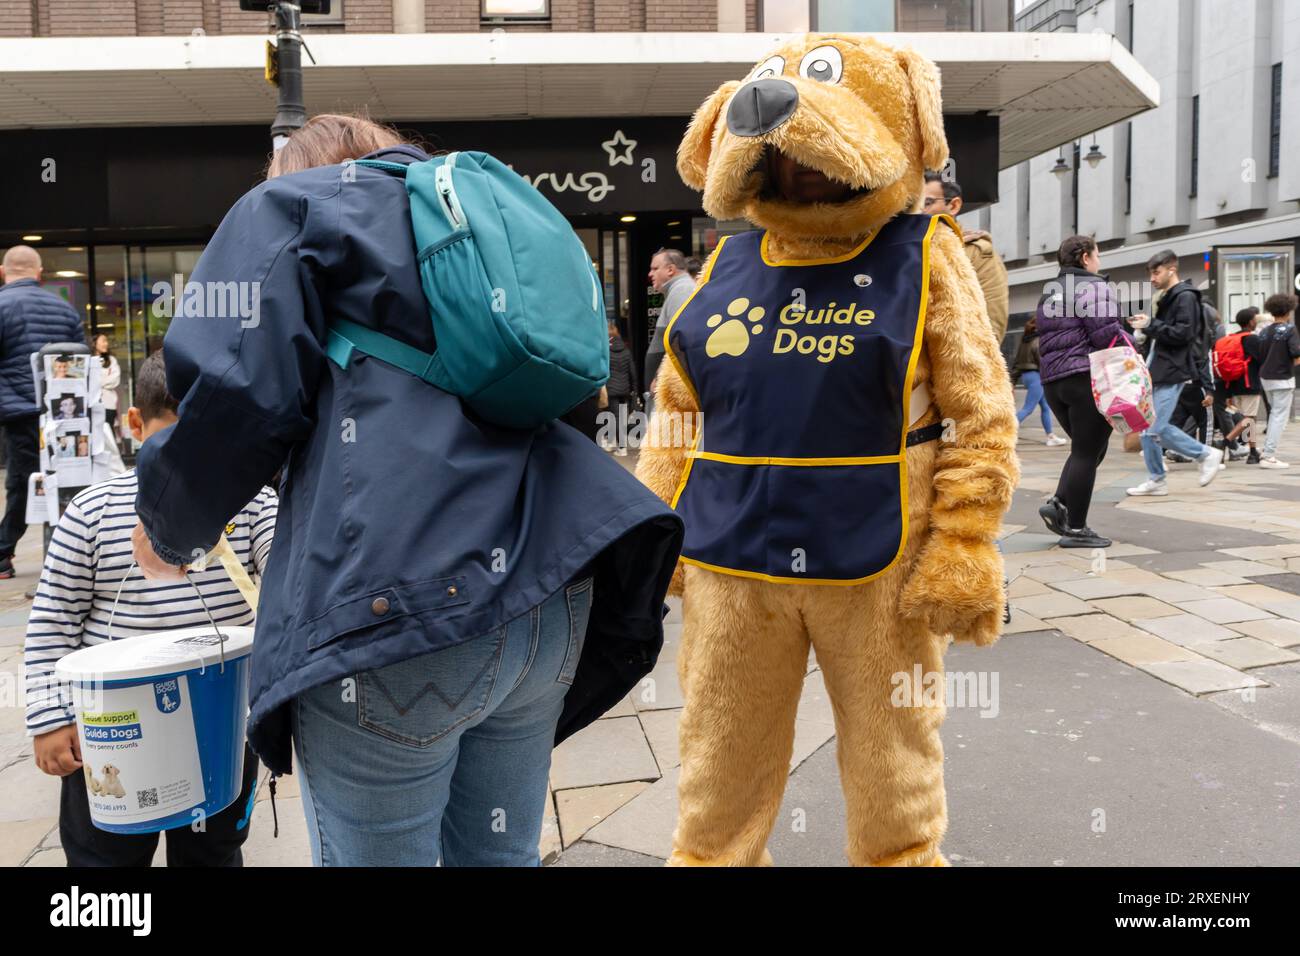 A person in a dog costume collects money for the Guide Dogs charity. Stock Photo